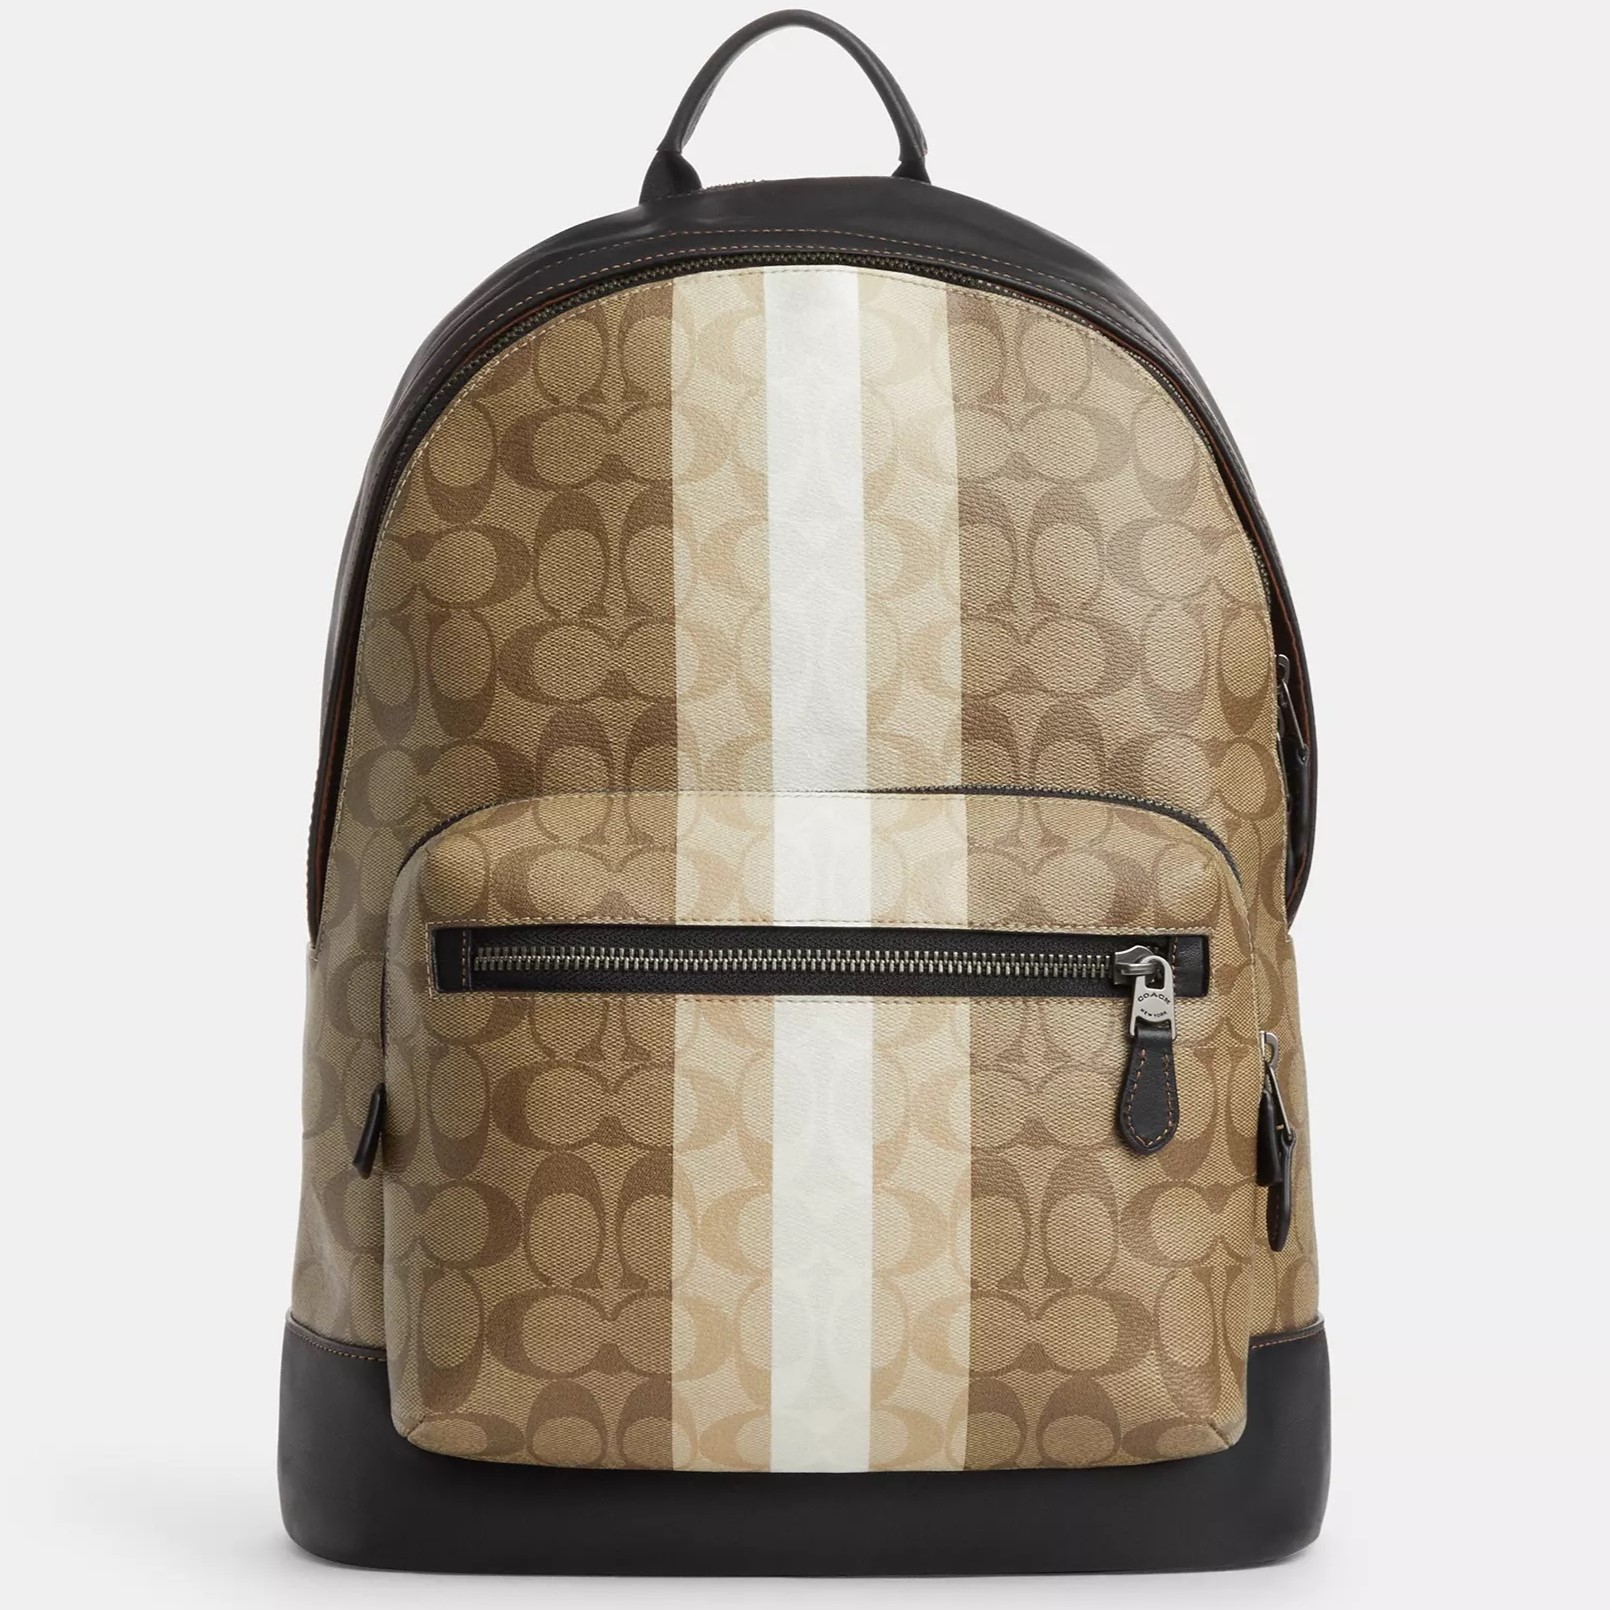 BALO MÀU NÂU SÁNG COACH WEST BACKPACK IN BLOCKED SIGNATURE CANVAS WITH VARSITY STRIPE CQ629 6